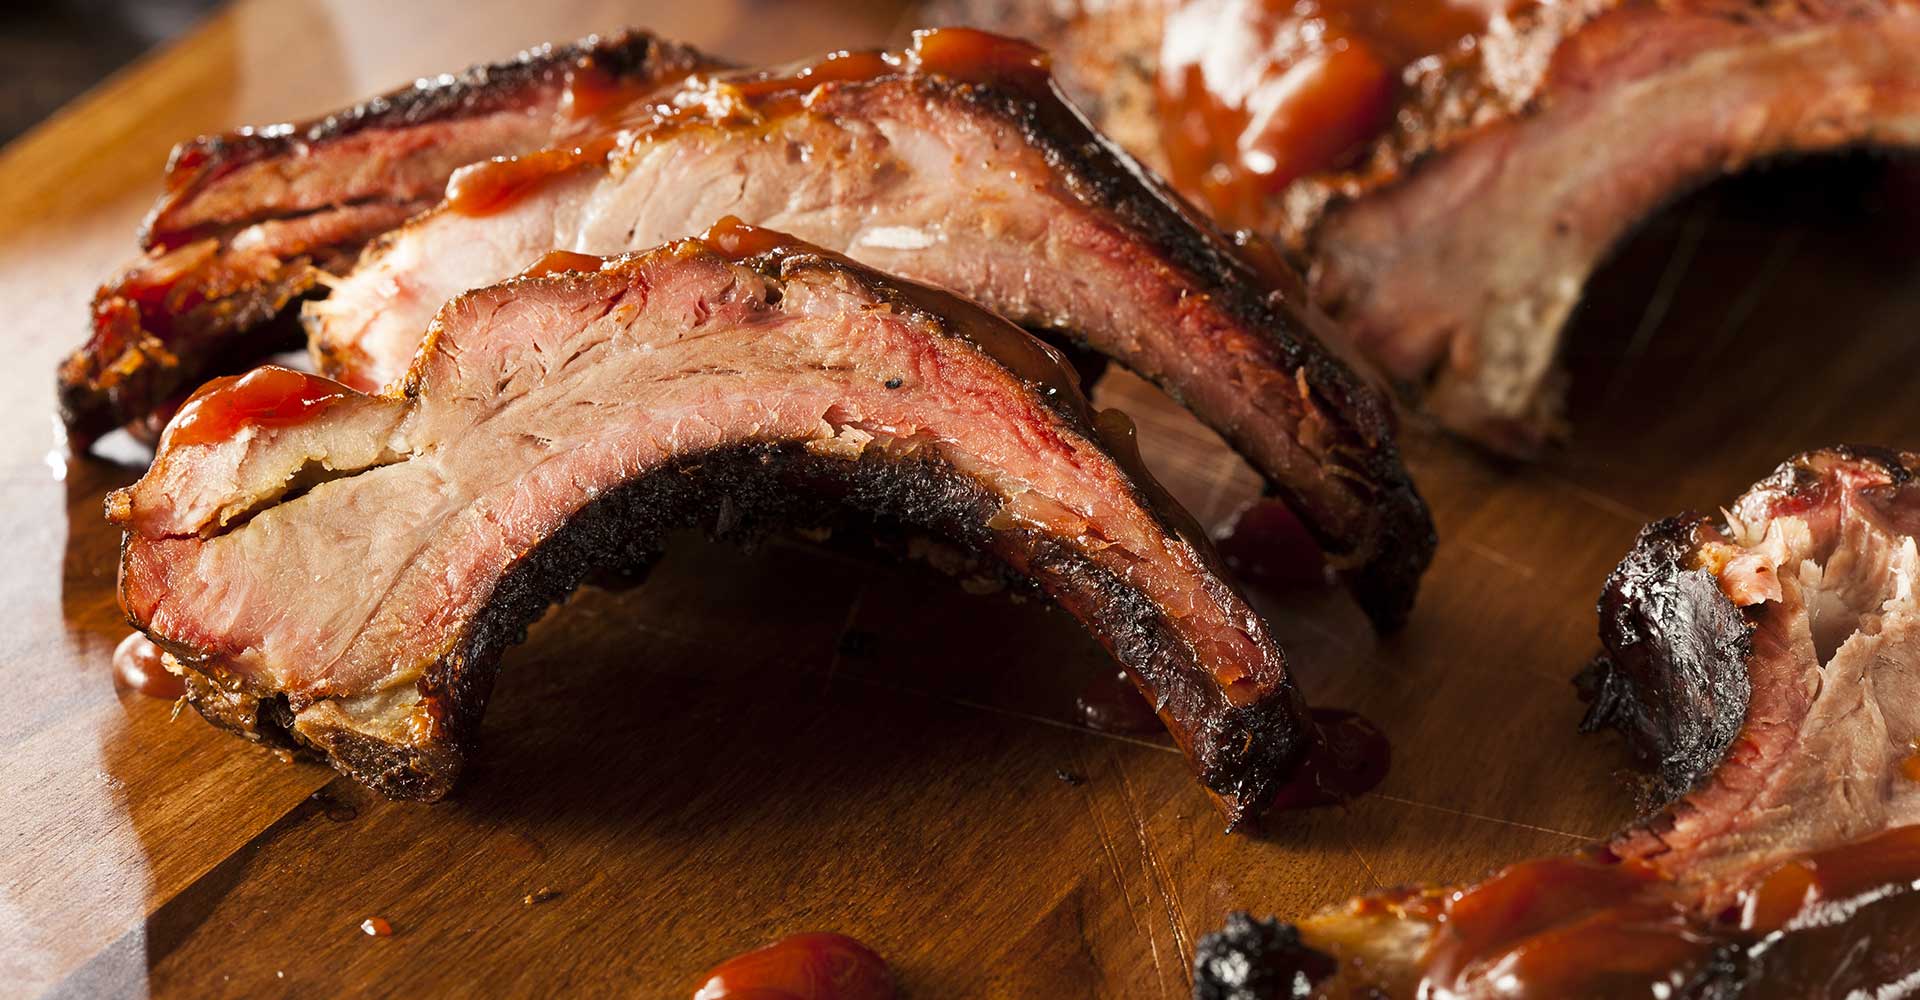 South County RI BBQ Ribs | Barbecue chicken pulled pork whiskey bar